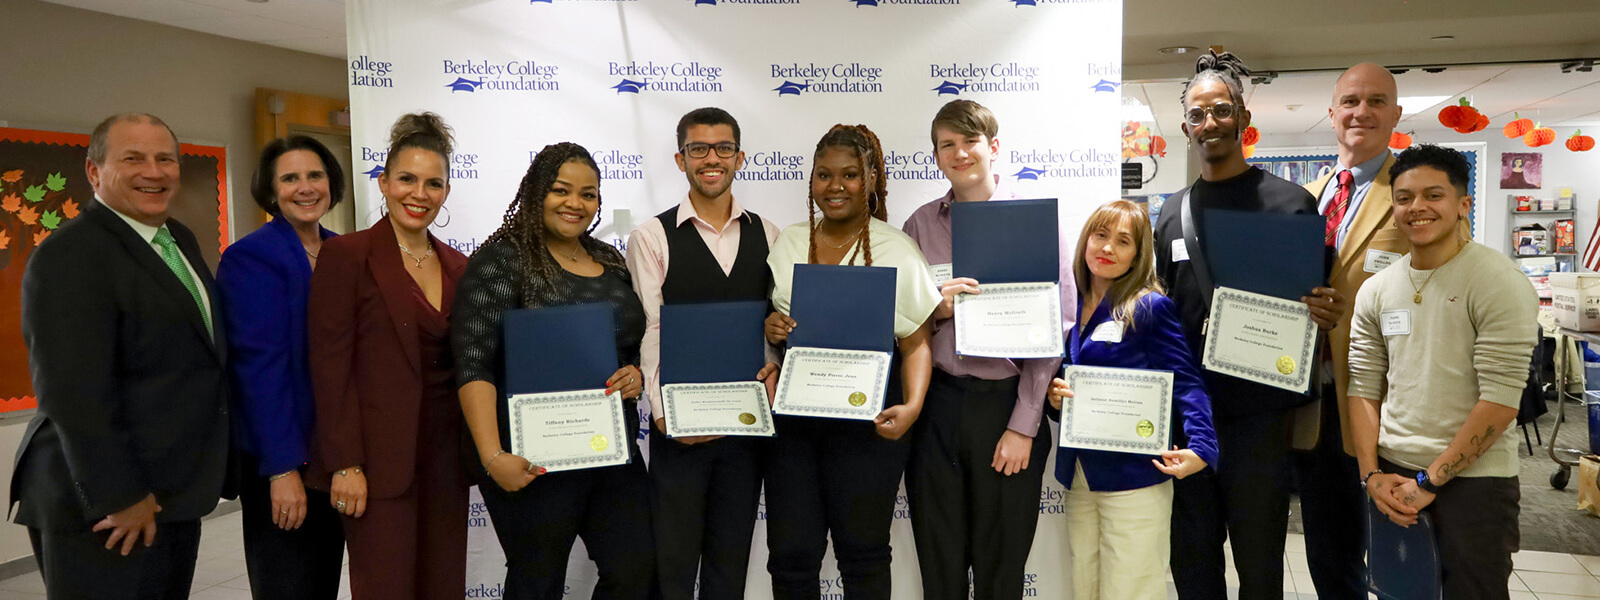 Berkeley College Foundation Scholarship Reception group of awarded students